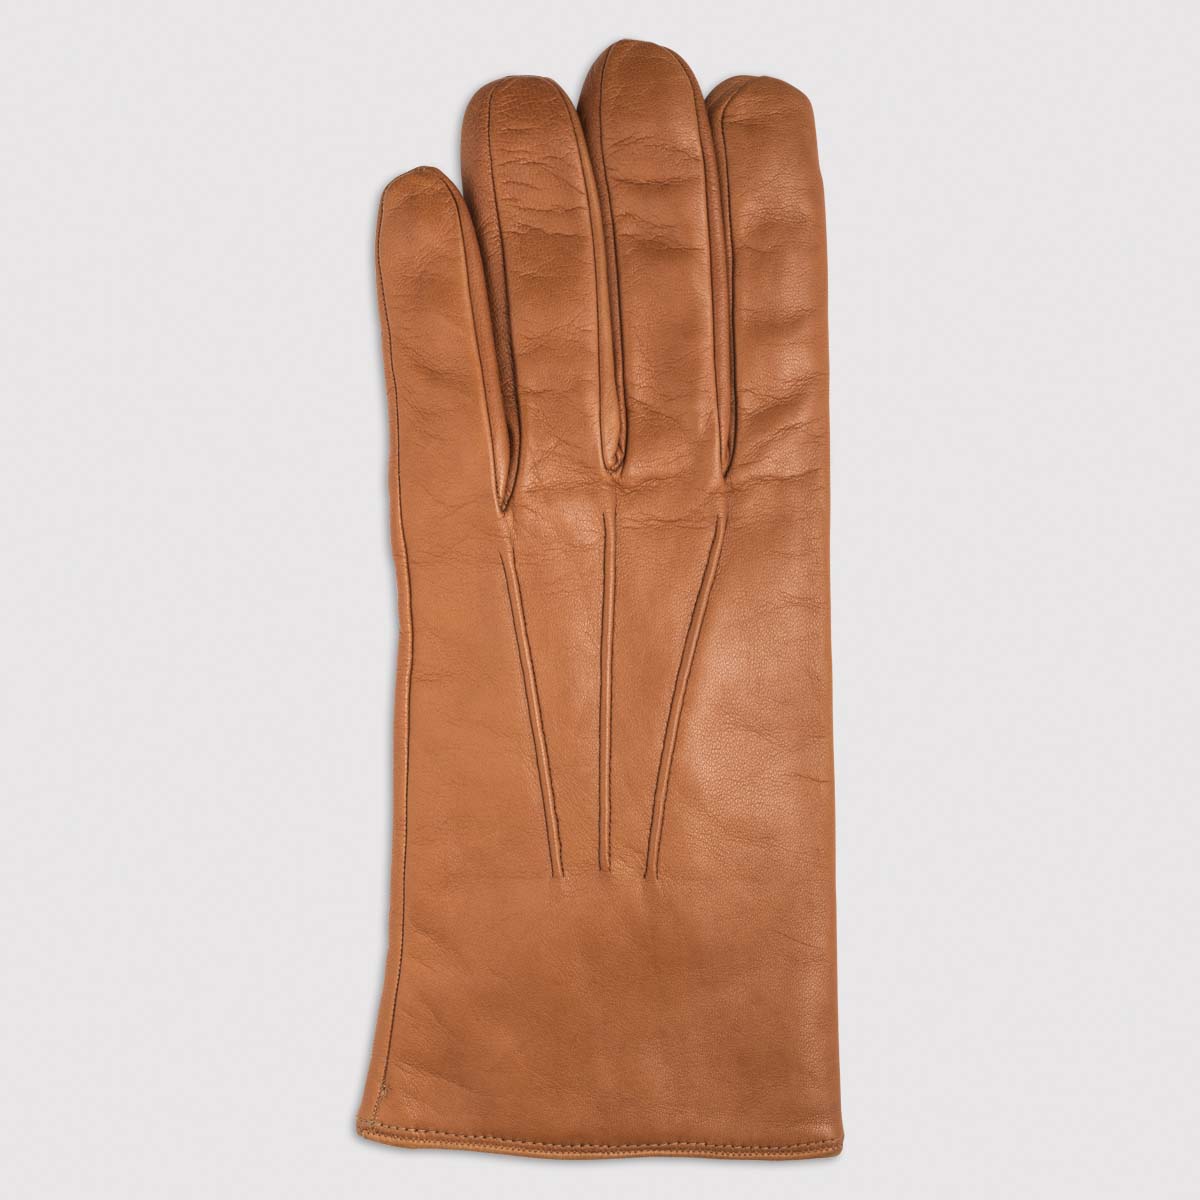 Nappa Leather Glove with Wool Lining and Button Detail in Camel Alpo Guanti on sale 2022